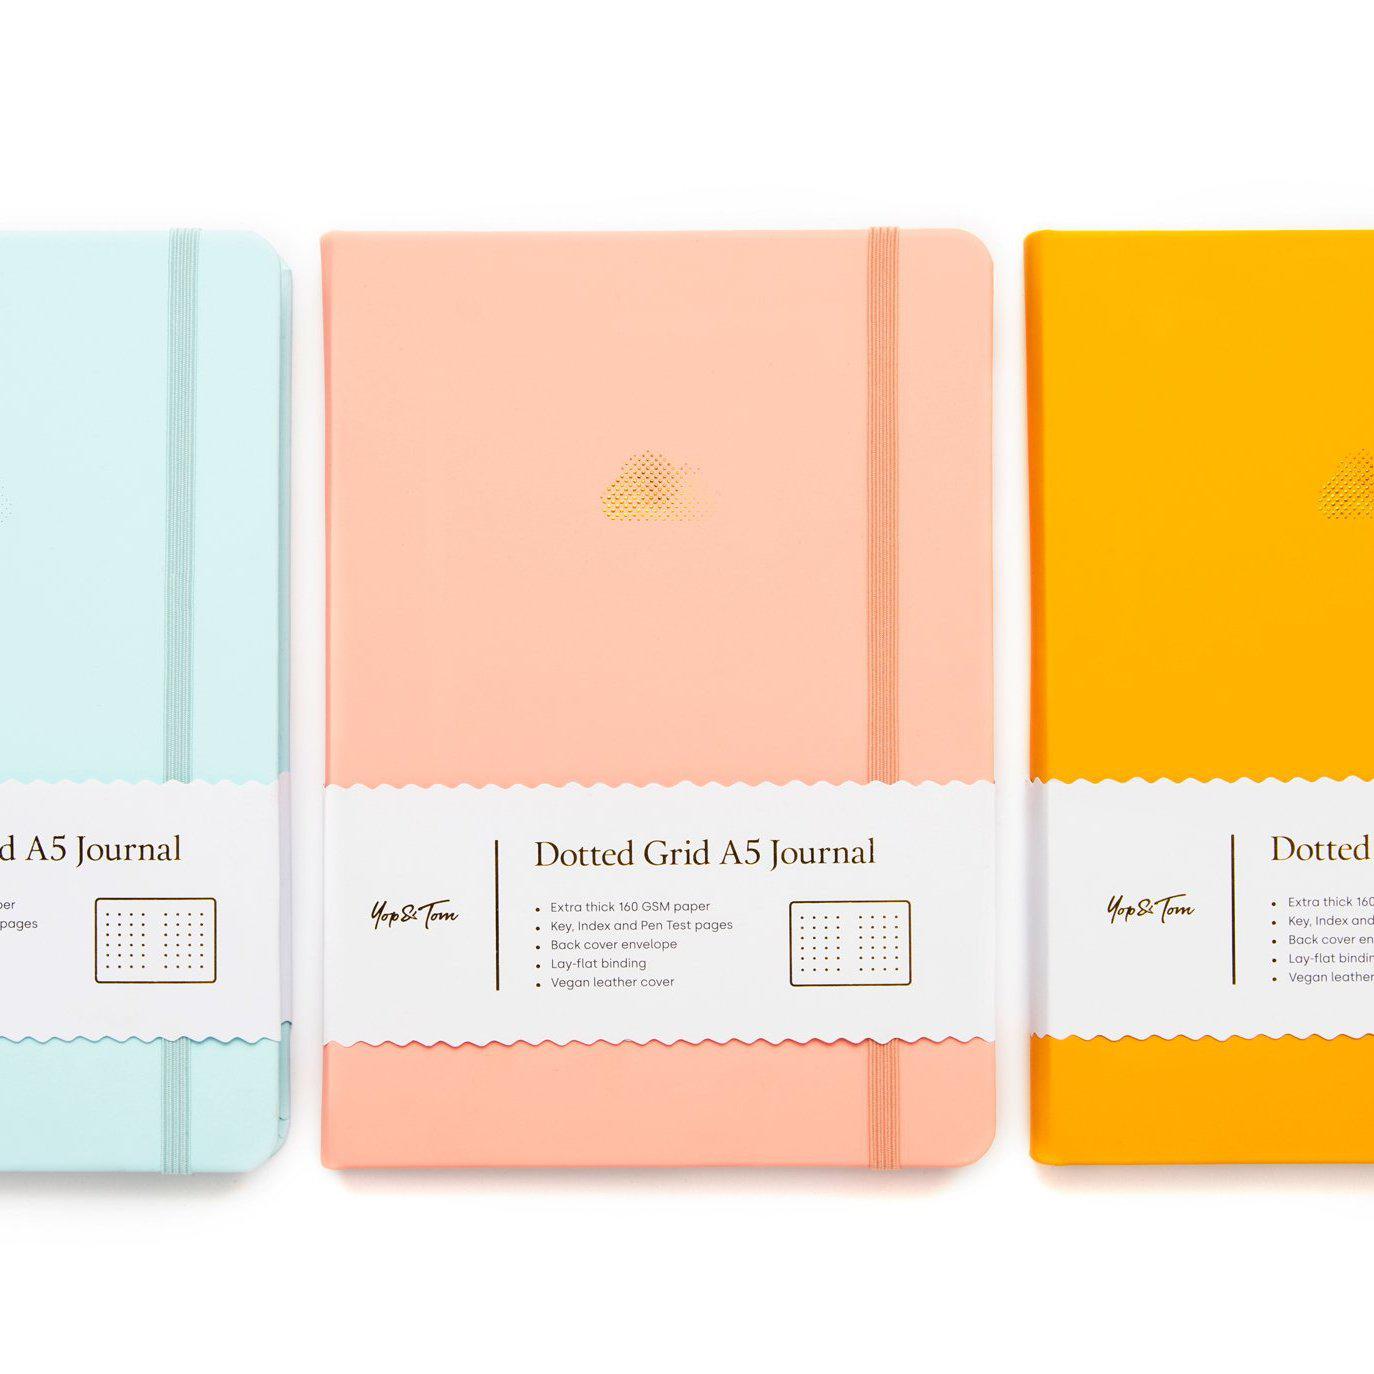 All three cloud bullet journals: eggshell blue, pastel peach and sunshine yellow